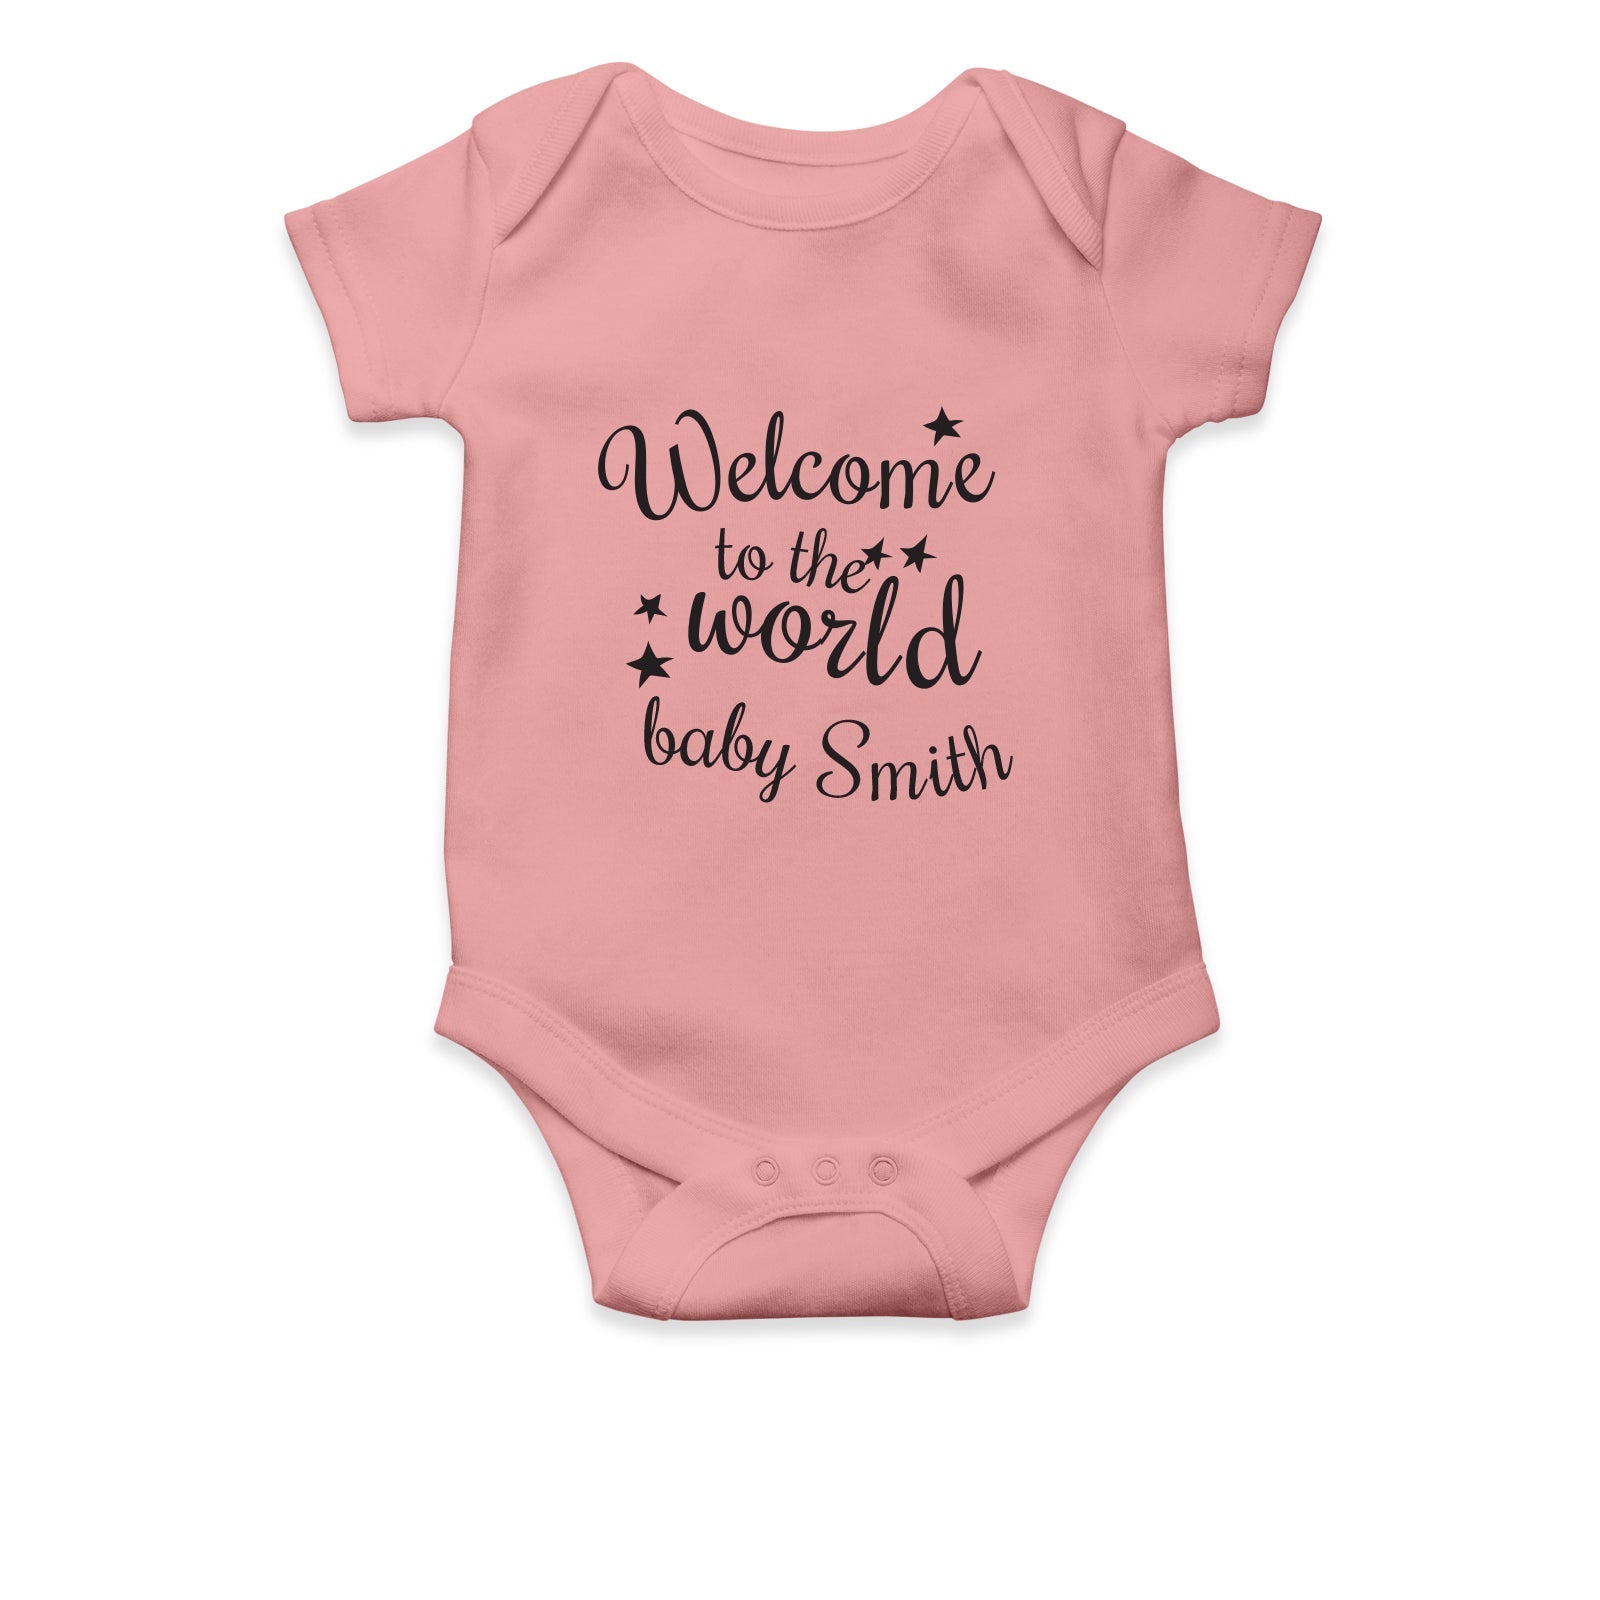 Personalised White Baby Body Suit Grow Vest - Welcome Little Baby